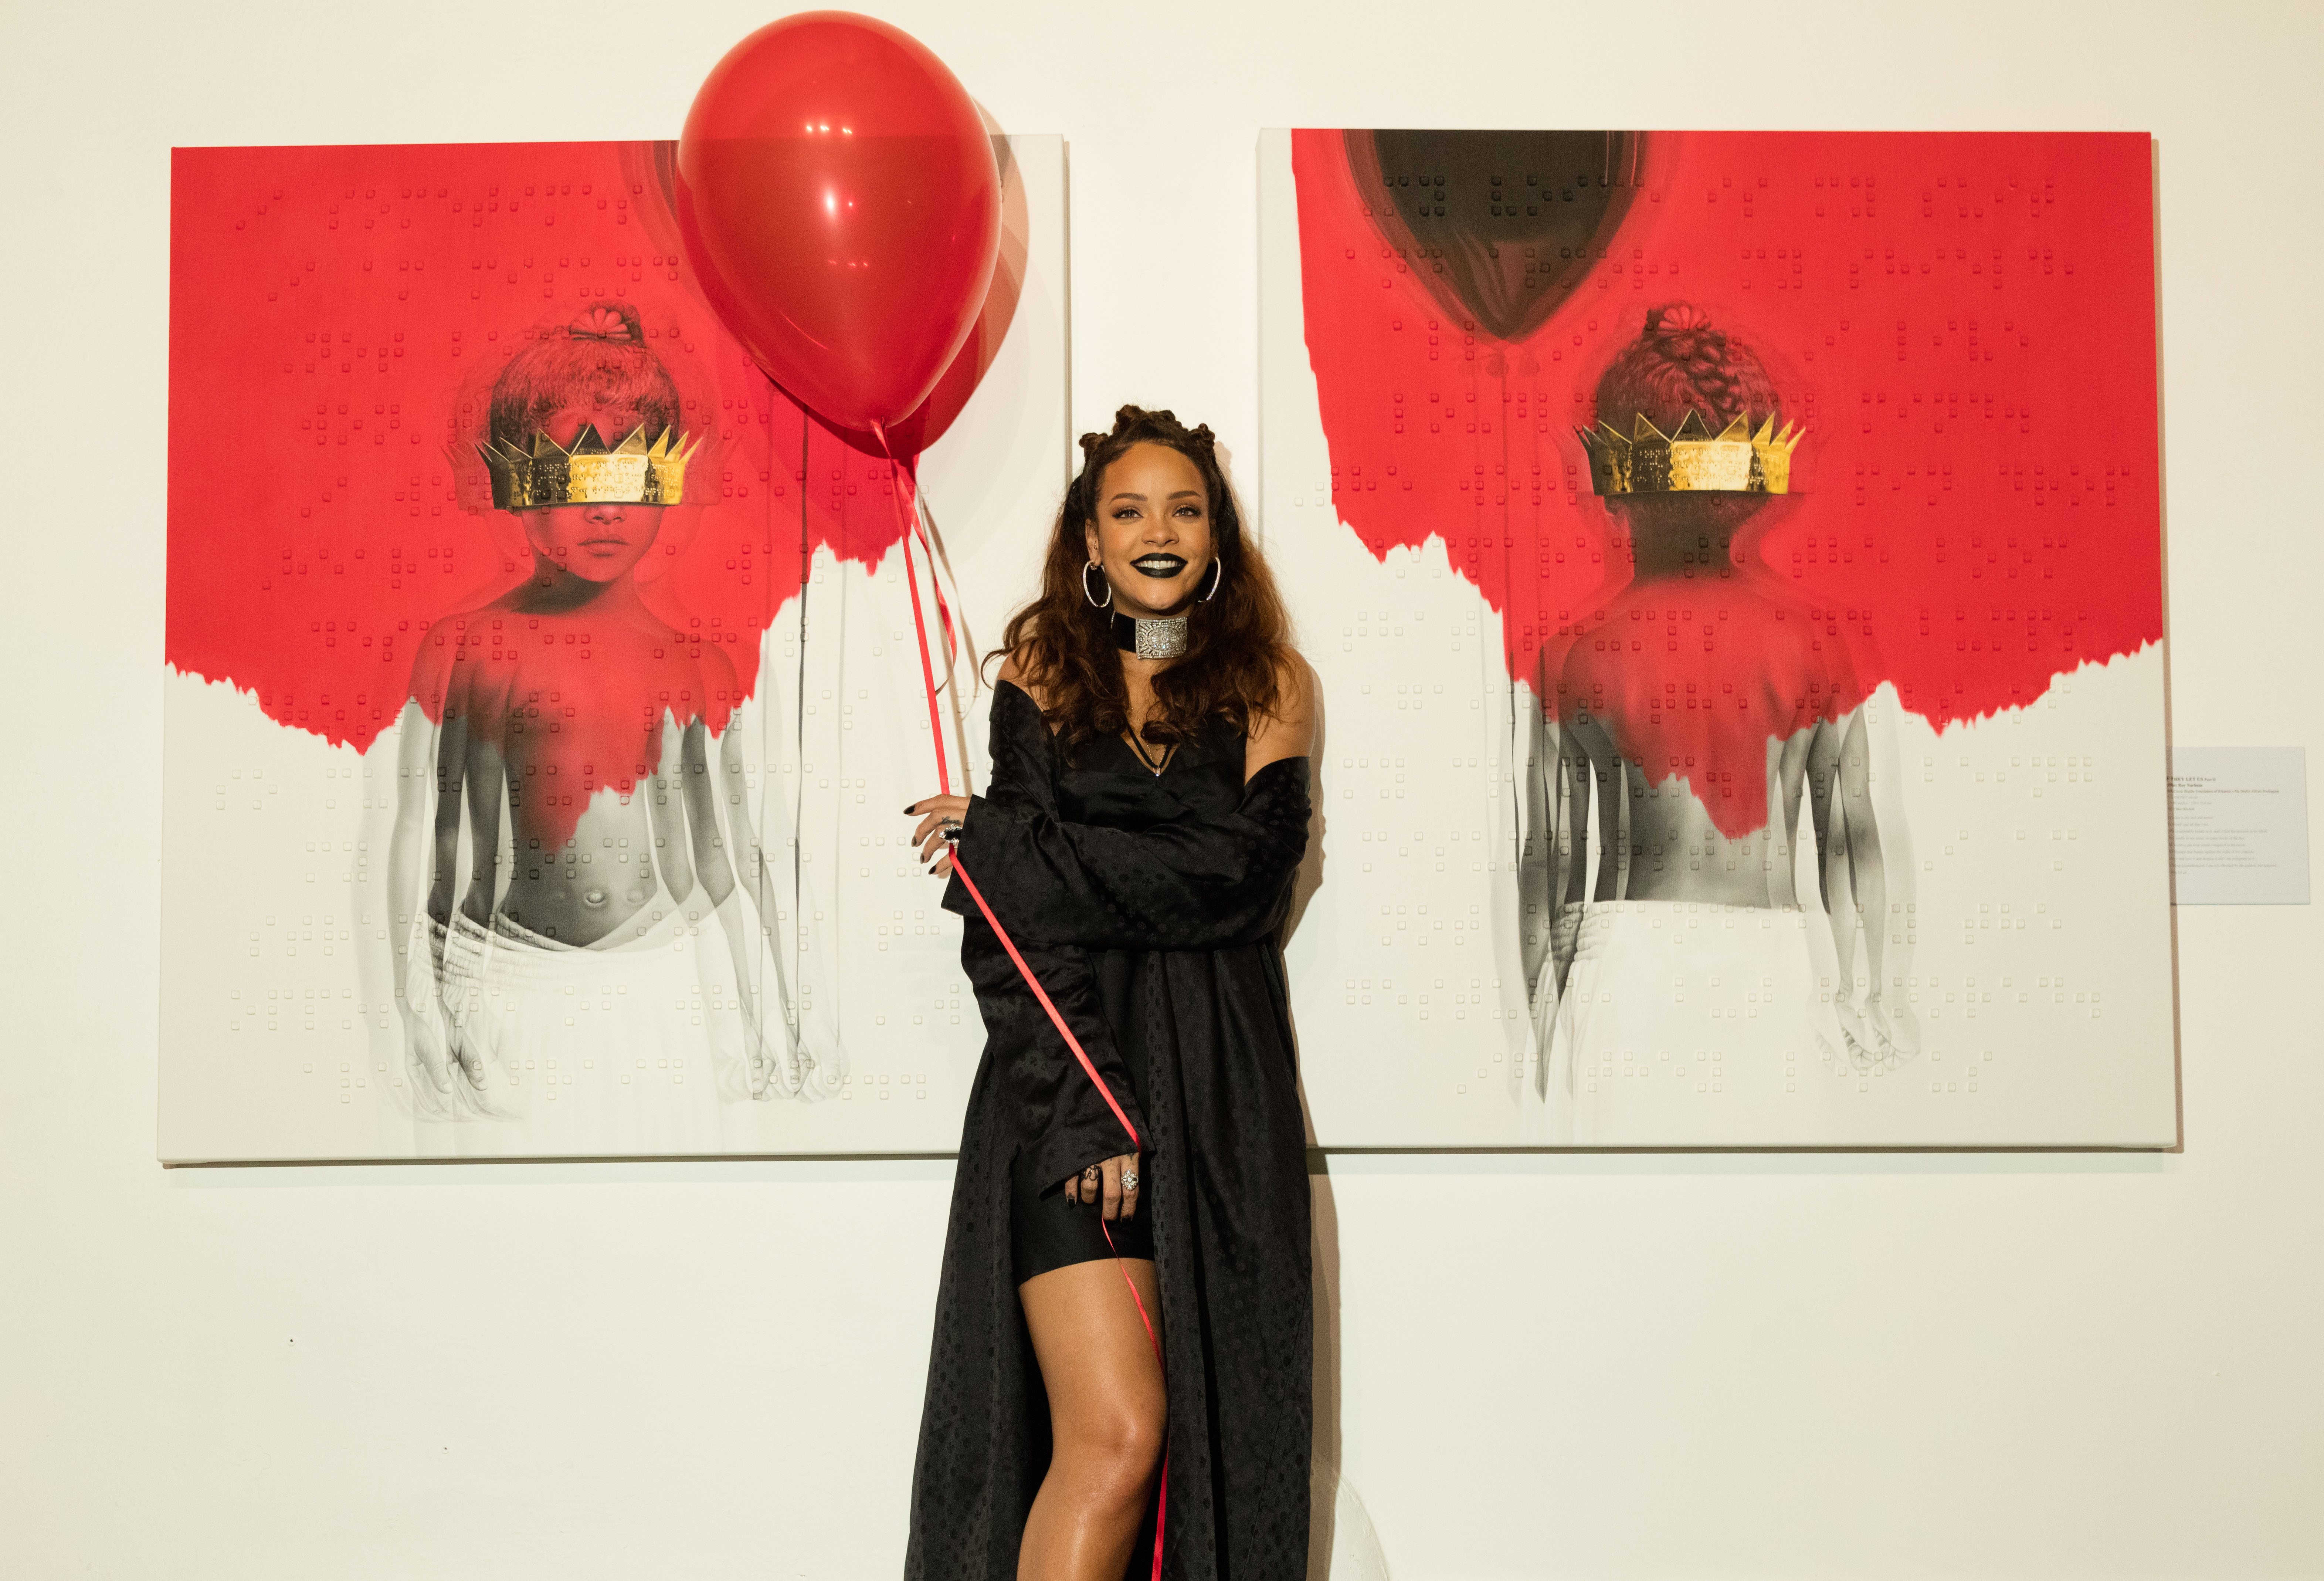 Rihanna at her 8th album artwork reveal for "ANTI" on October 7, 2015, in Los Angeles. | Source: Getty Images